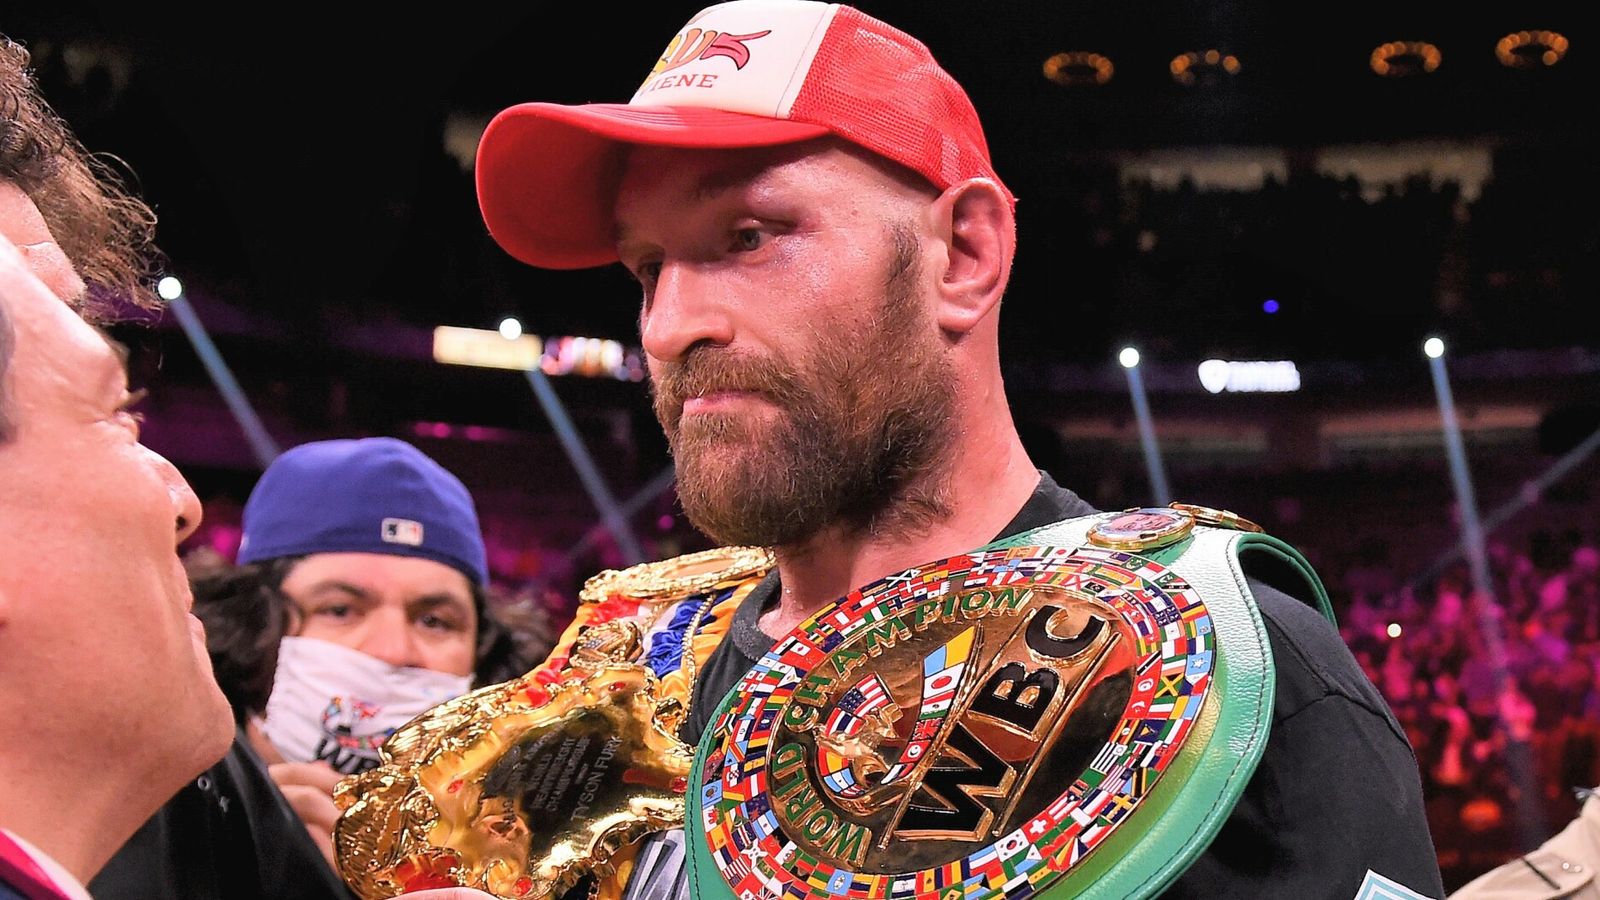 Tyson Fury had the 'most trouble' with Otto Wallin who is one win away from a rematch, says promoter Dmitriy Salita